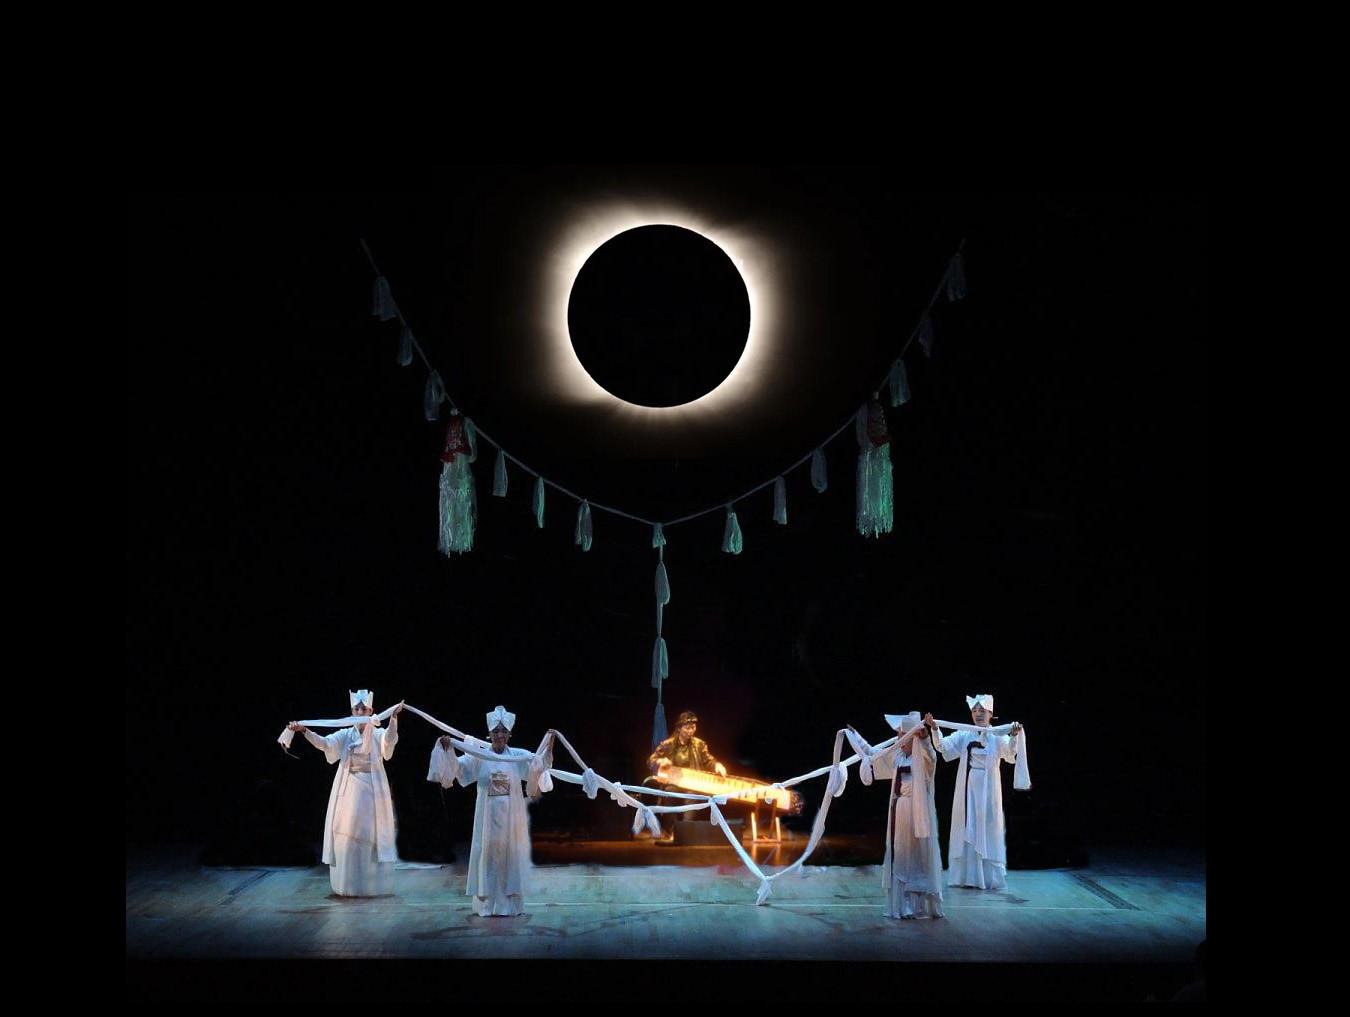 On dark stage, lit by an eclipse-like orb, four dancers in all white perform in front of Jin Hi who plays a string instrument behind them.